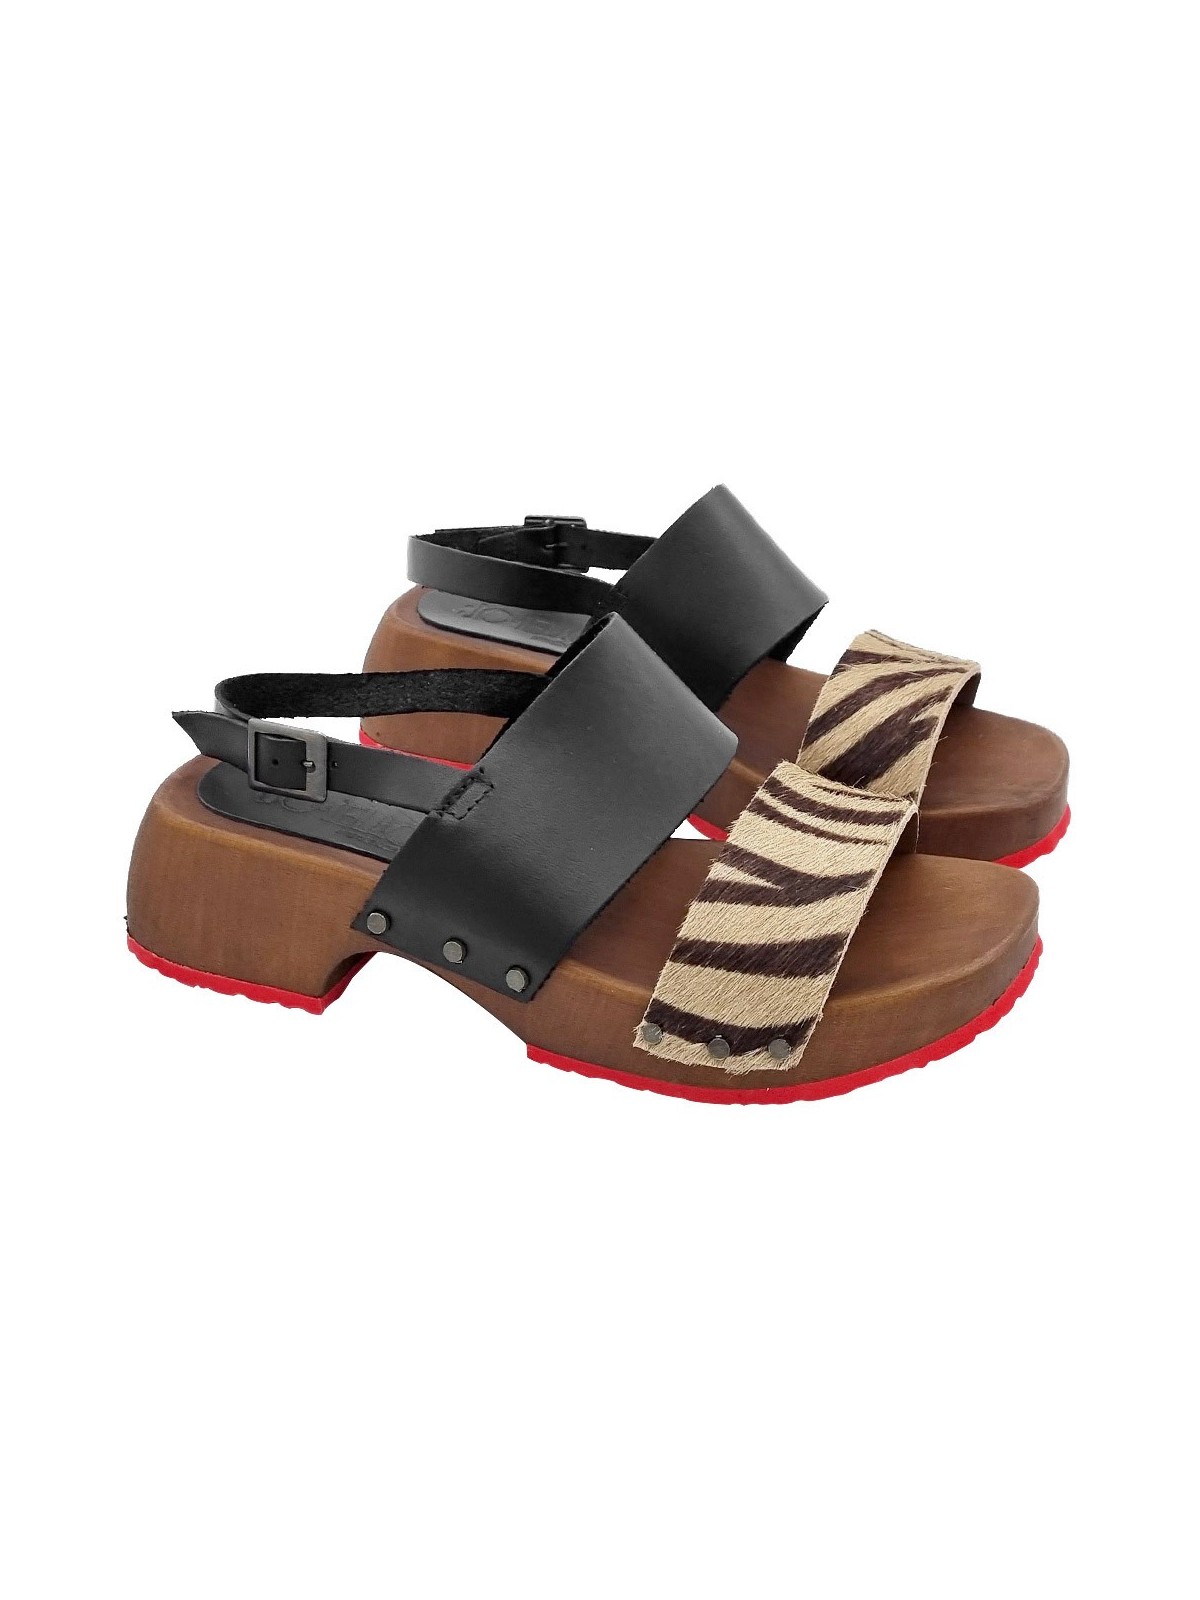 BLACK SANDALS WITH BLACK LEATHER BAND AND ZEBRA "EFFECT"